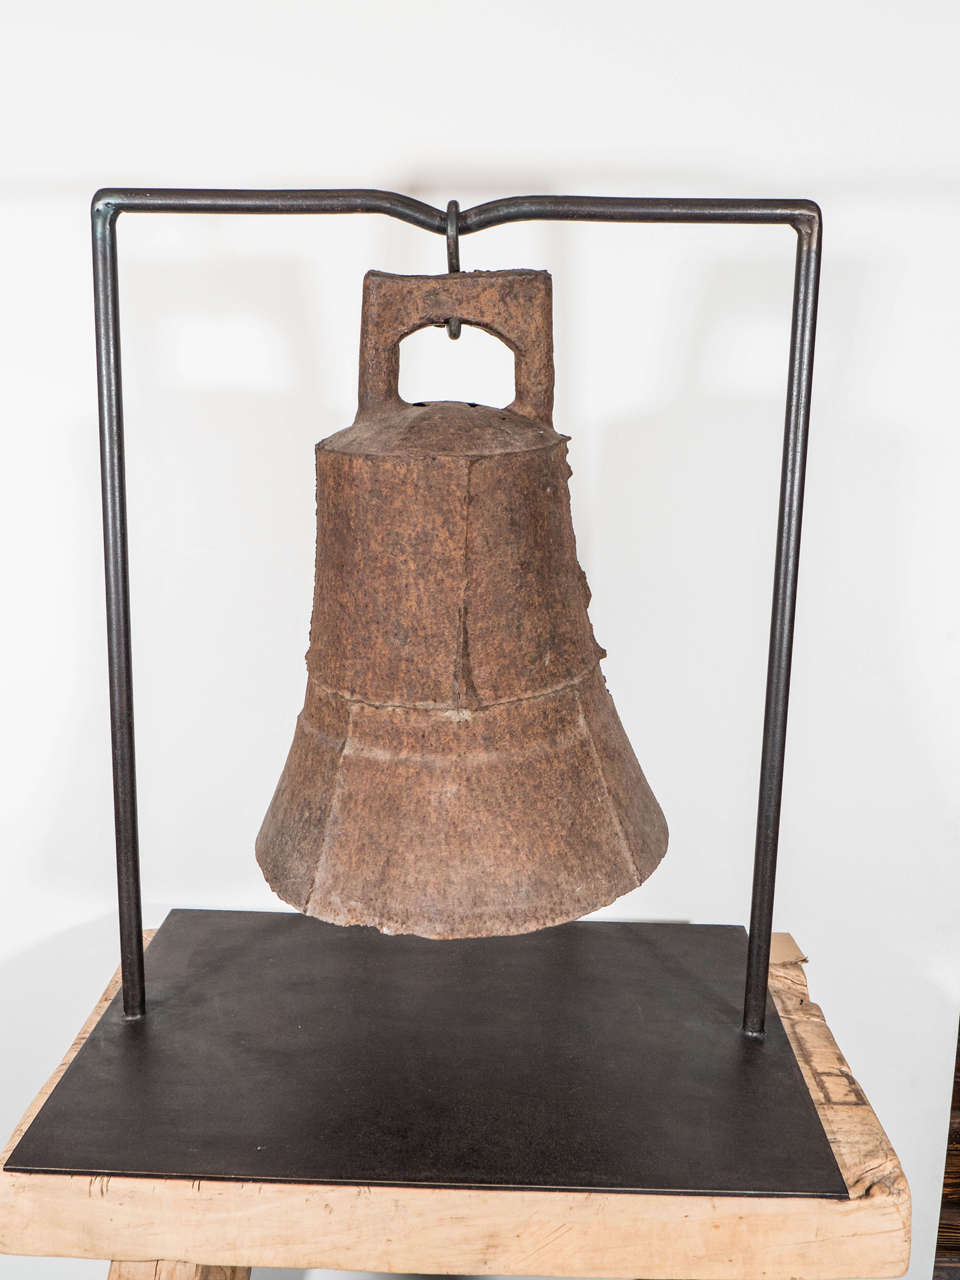 An unusually large and striking cast iron temple bell with custom iron stand. Beautifully patinated from years of use, this piece virtually emanates age and spirituality.   The rough casting markings add visual interest and authenticity to this